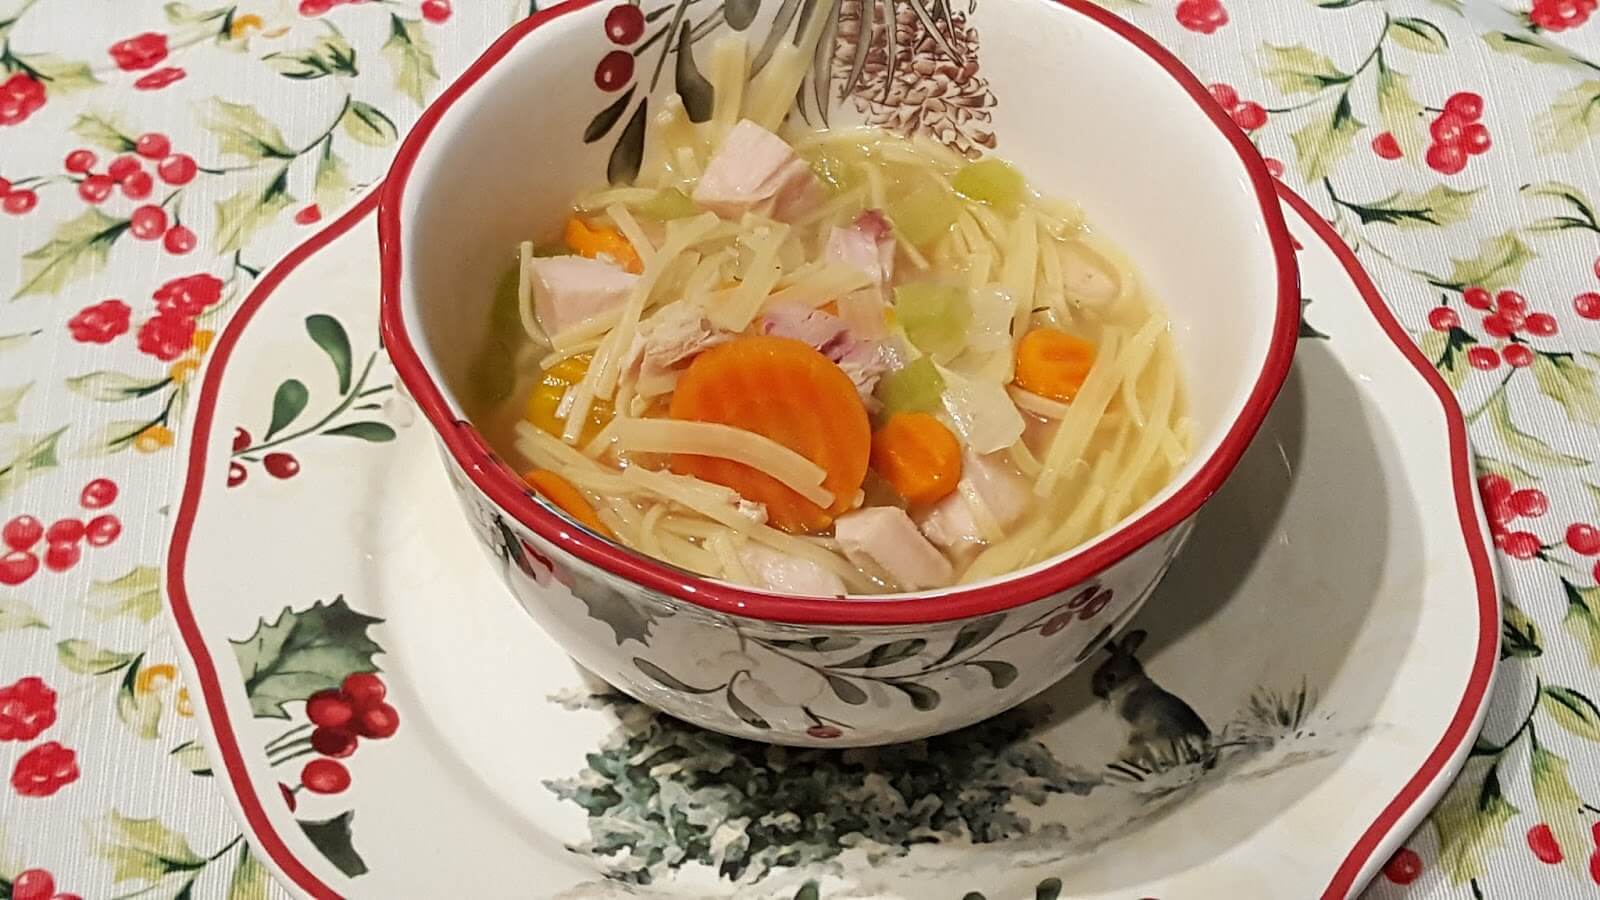 Turkey Noodle Soup made with leftover Thanksgiving Turkey